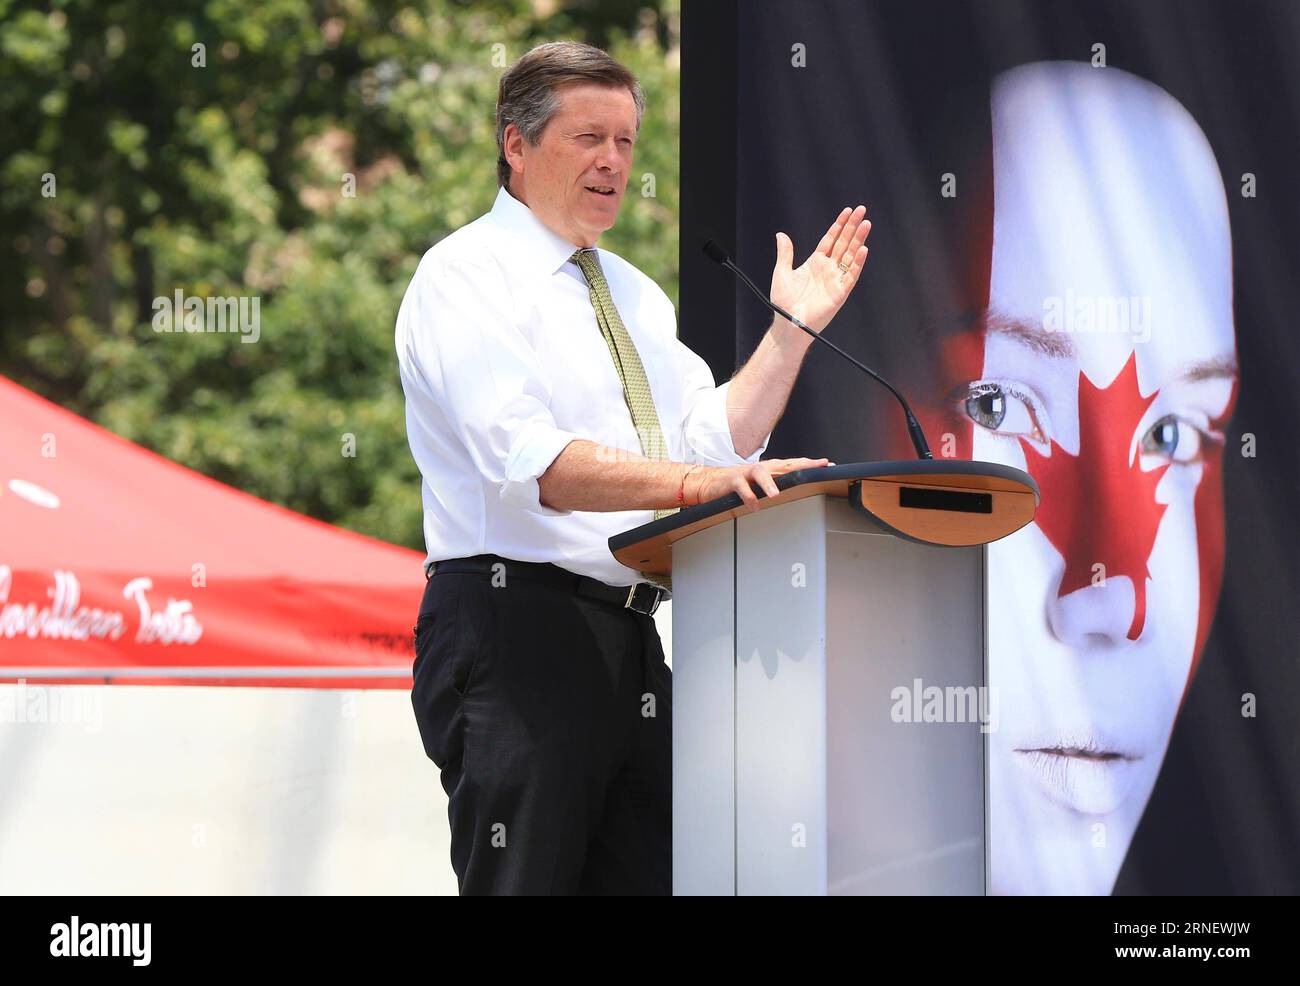 (160705) -- TORONTO, July 5, 2016 -- Toronto Mayor John Tory delivers a speech during the official launch ceremony of the 2016 Toronto Caribbean Carnival at Nathan Philips Square in Toronto, Canada, July 5, 2016. As the largest cultural festival of its kind in North America, the annual exciting three-week cultural explosion of Caribbean music, cuisine and revelry as well as visual and performing arts kicked off on Tuesday. ) CANADA-TORONTO-CARIBBEAN CARNIVAL-OFFICIAL LAUNCH CEREMONY ZouxZheng PUBLICATIONxNOTxINxCHN   160705 Toronto July 5 2016 Toronto Mayor John Tory delivers a Speech during T Stock Photo